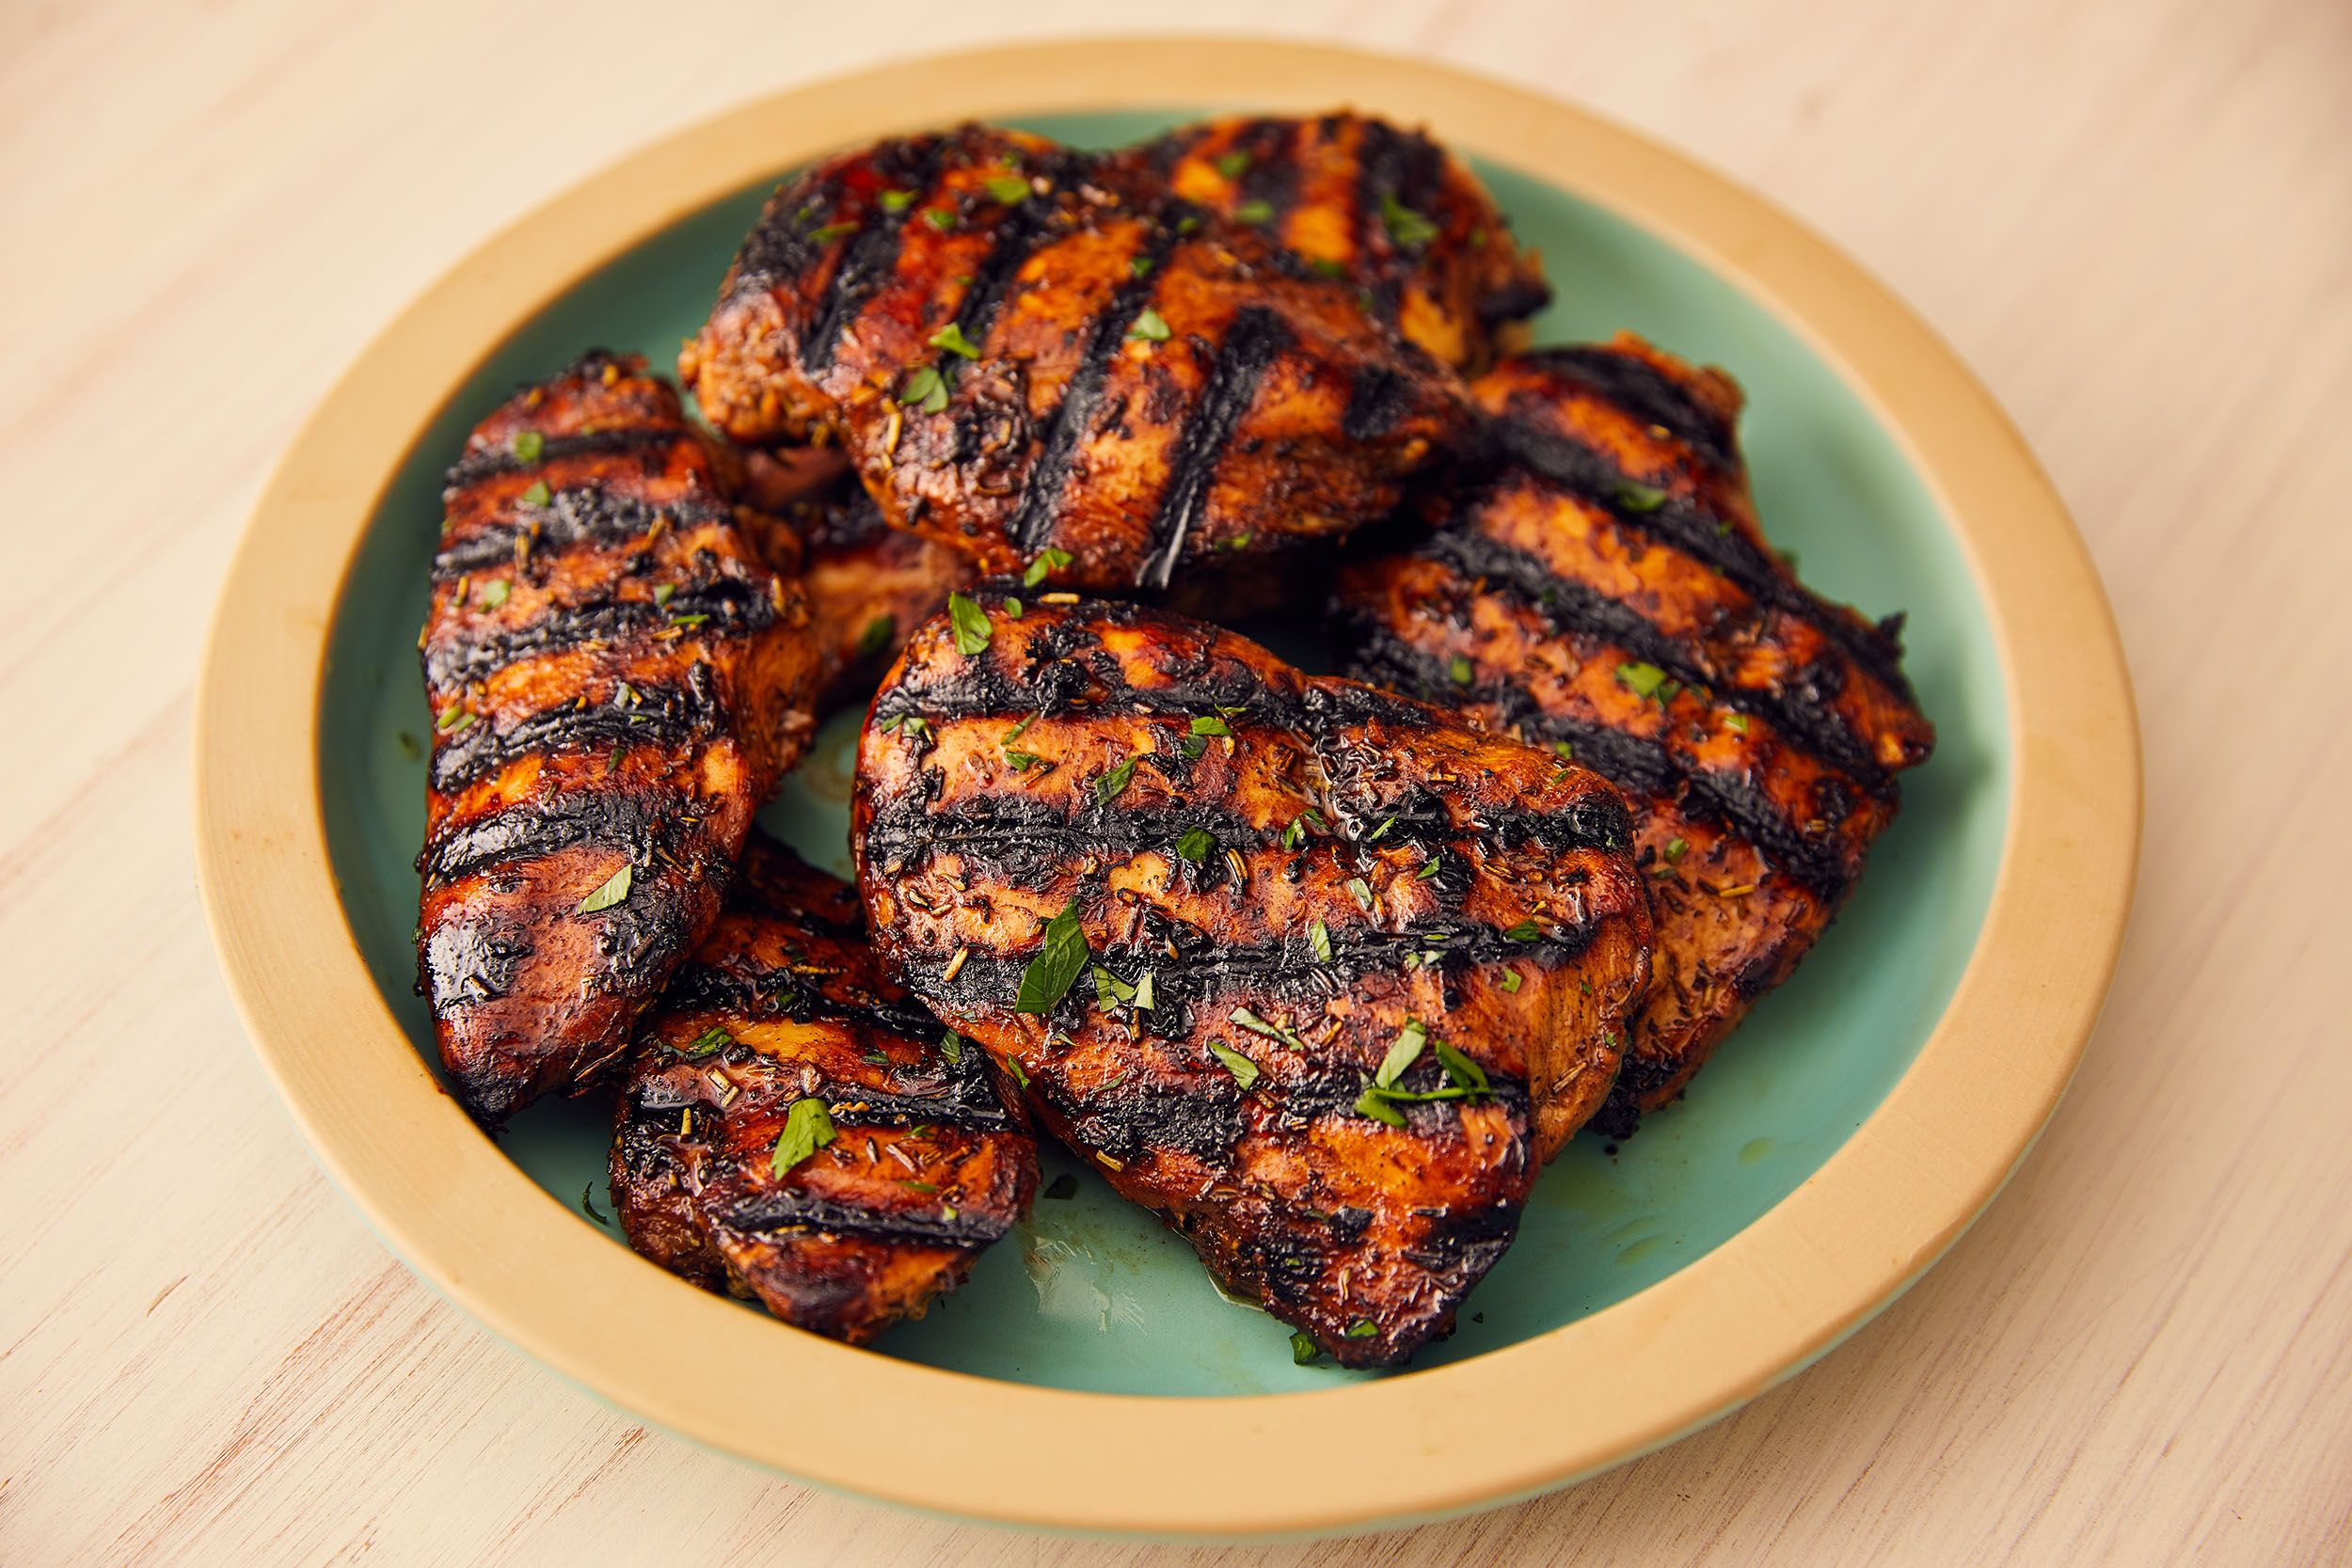 Best Grilled Chicken Breast Recipe - How to Grill Juicy Chicken Breast